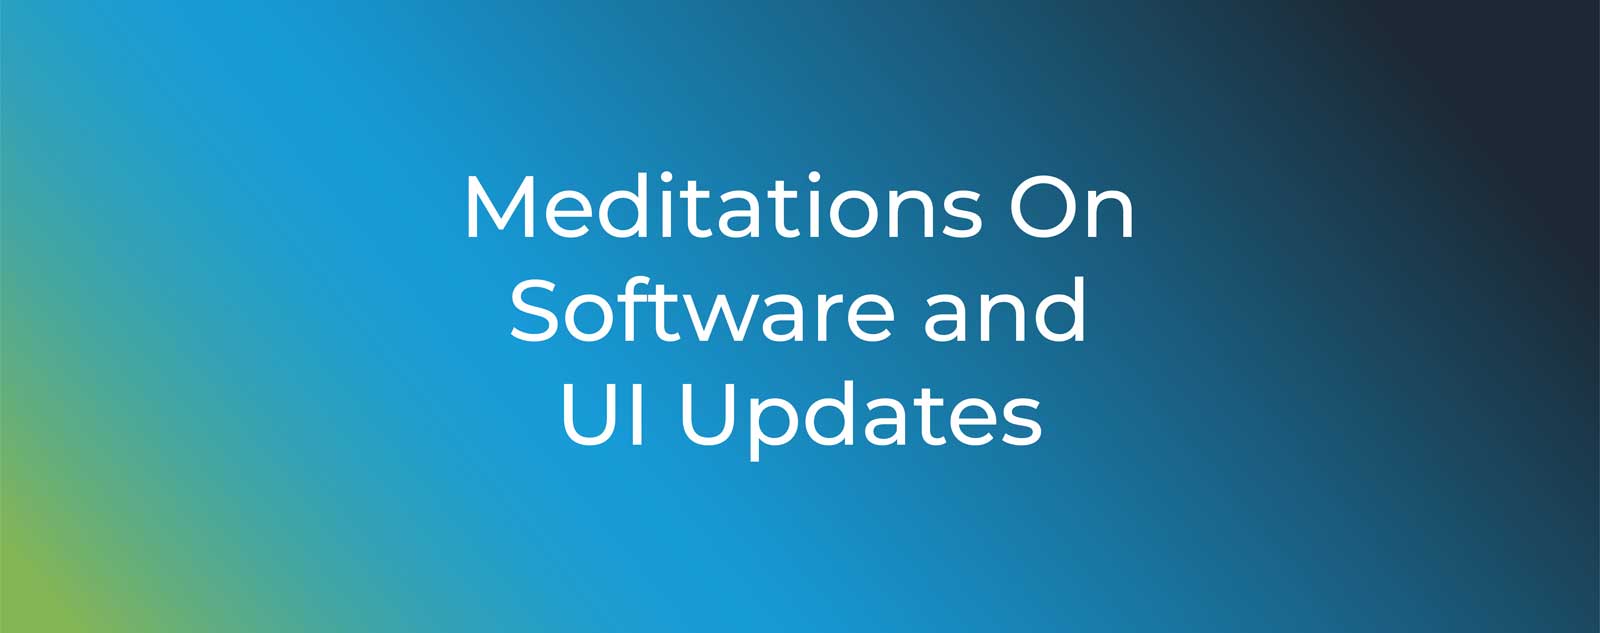 meditations-on-software-and-ui-updates